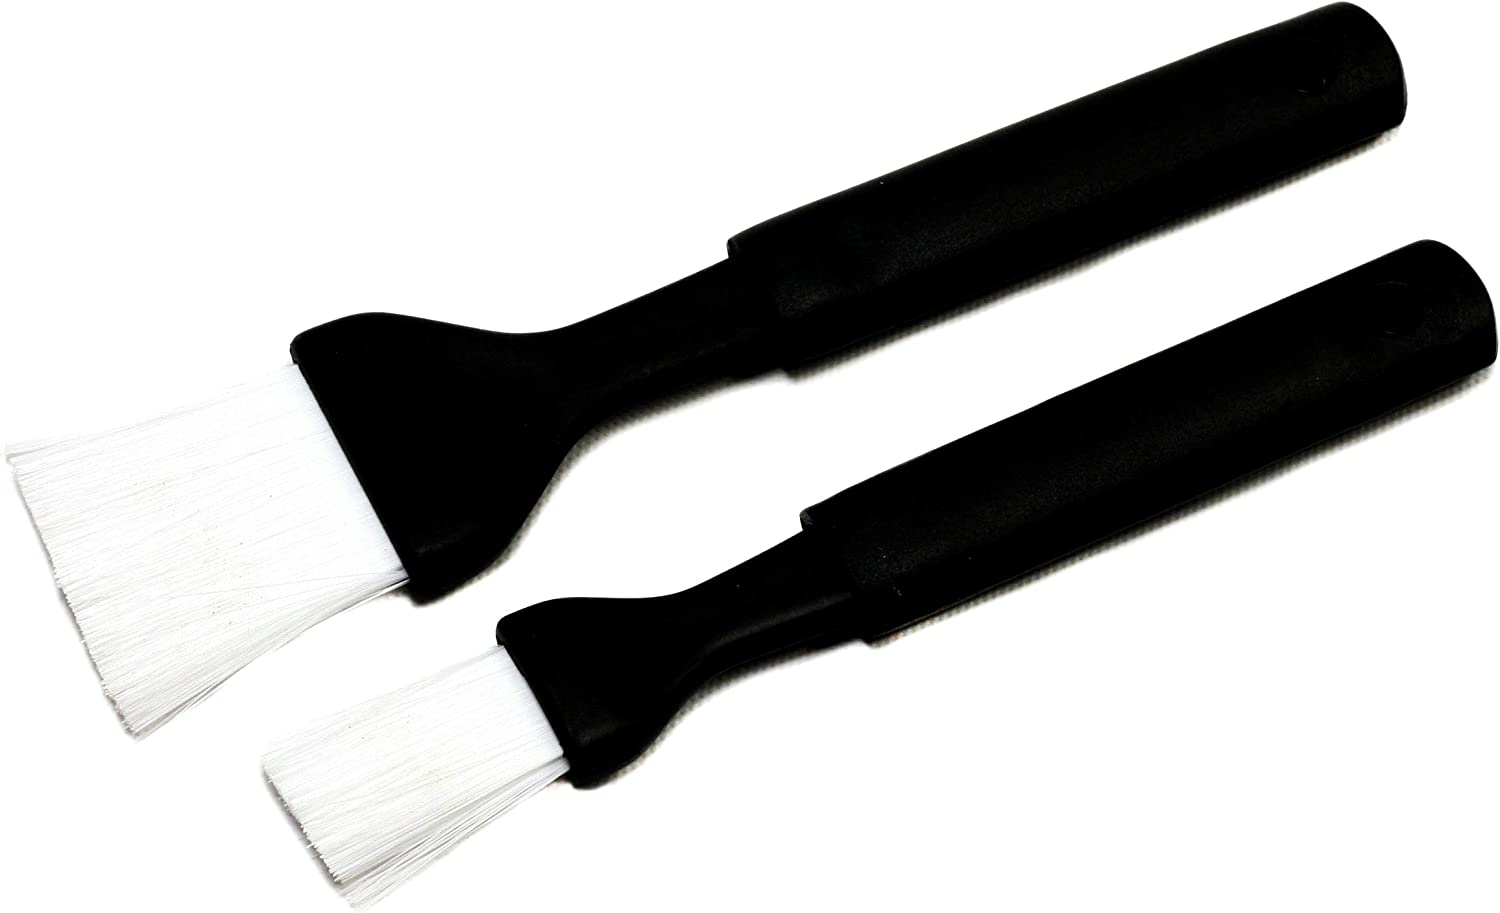 Chef Craft 21266 Classic Plastic Basting Brush Set, 7.5 and 8.5 inches in Length 2 Piece, Black Import To Shop ×Product